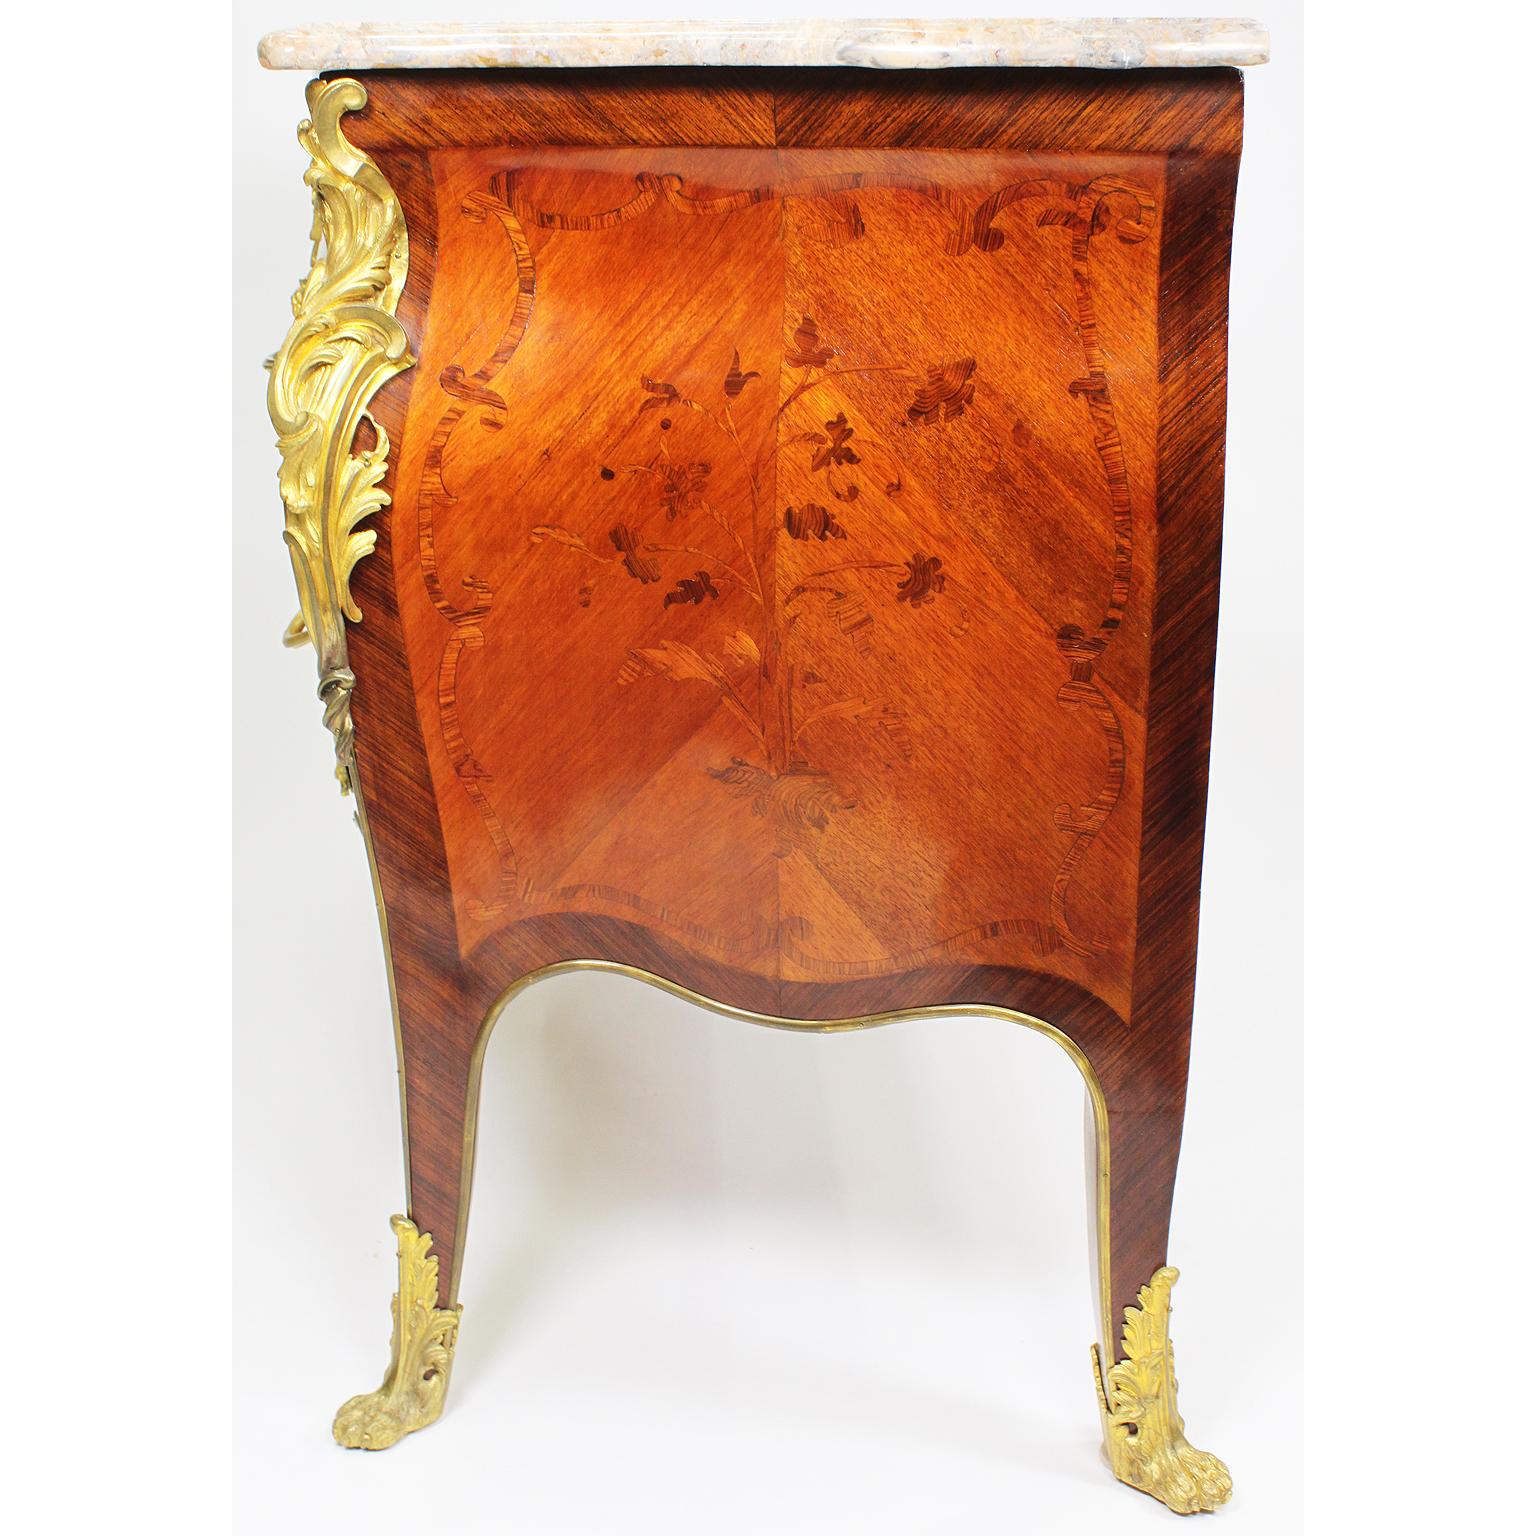 French 19th-20th Century Louis XV Style Gilt-Bronze Mounted Marquetry Commode For Sale 2